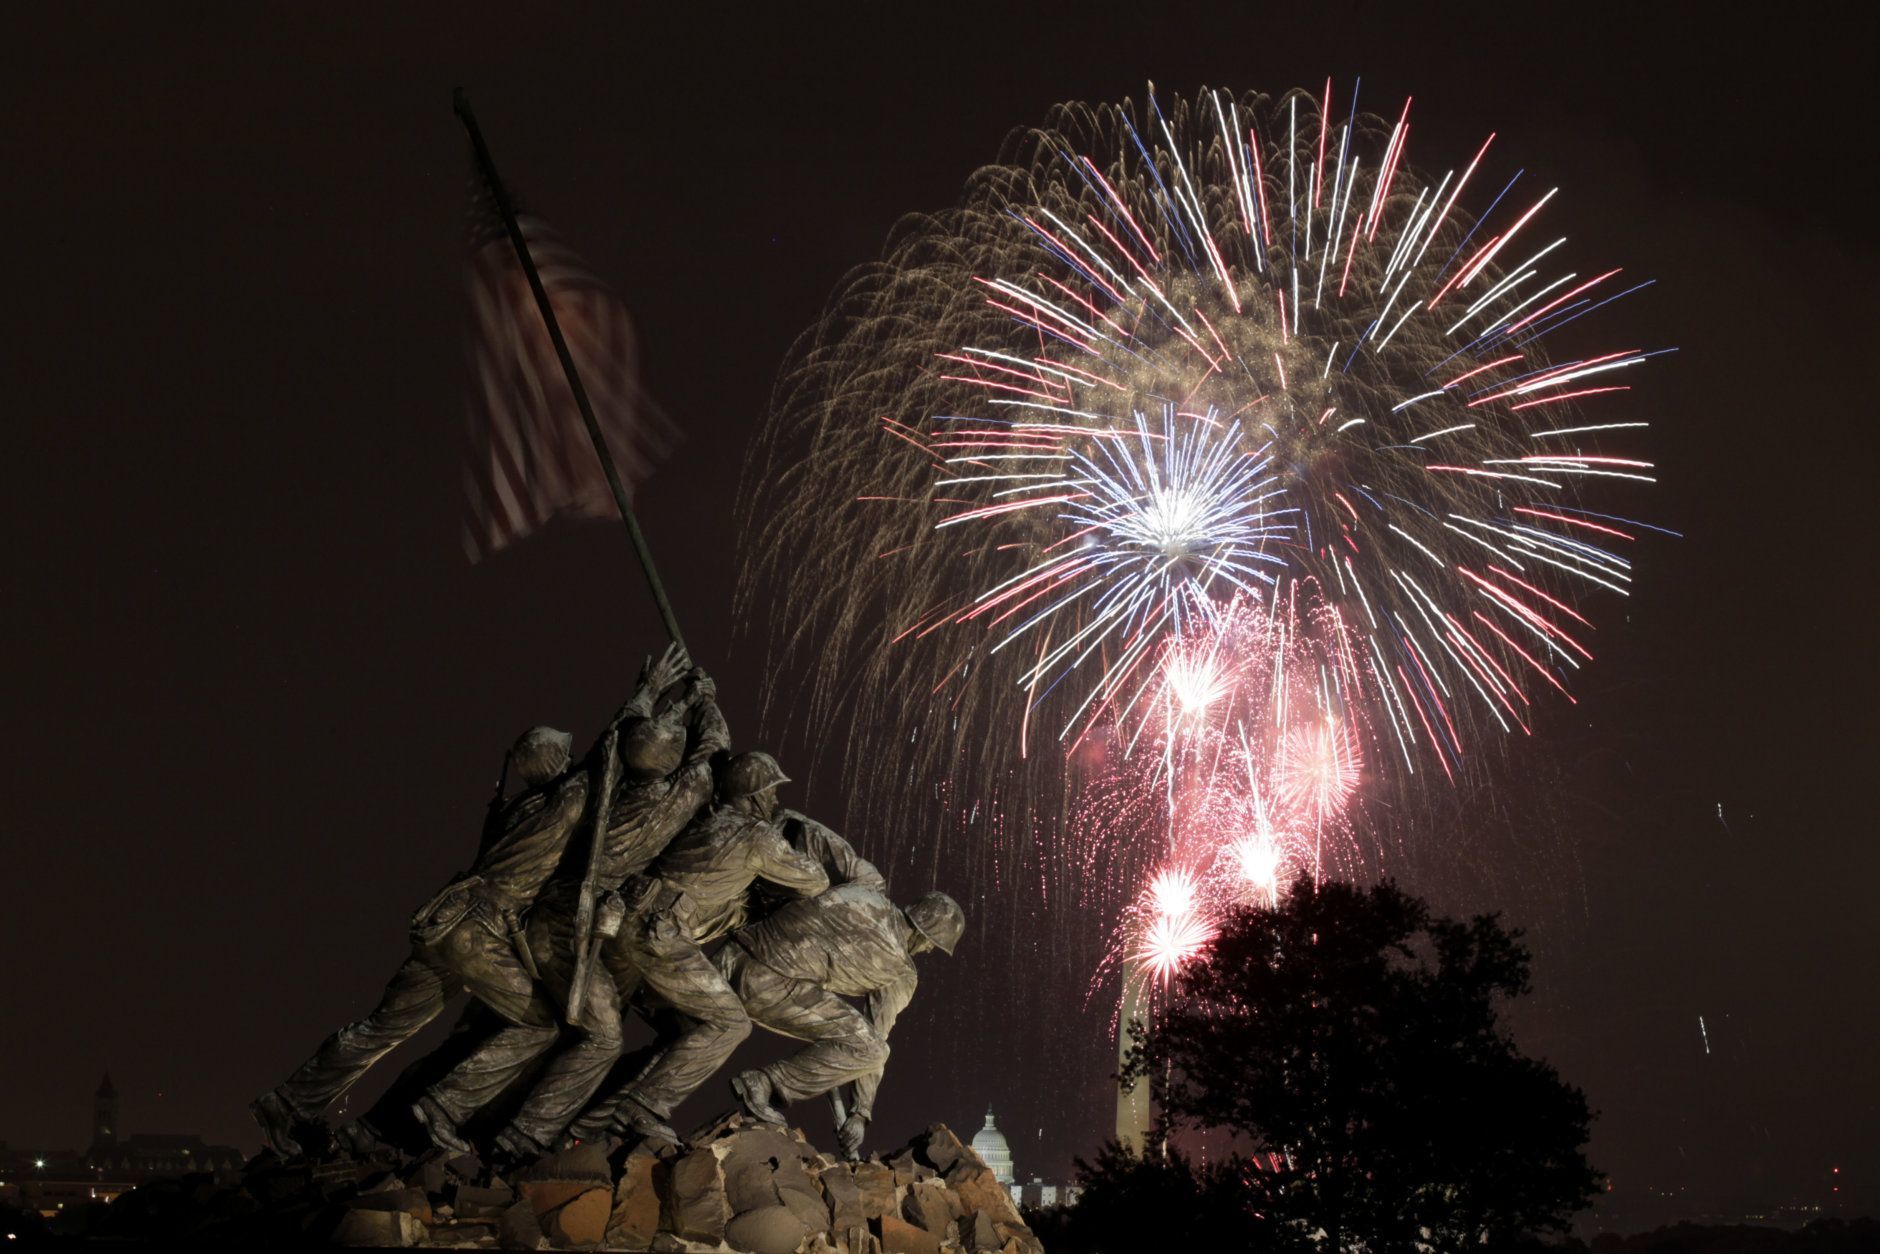 The United States Marine Corps War Memorial, better known as the Iwo Jima Memorial, is seen in Arlington, Va., Monday July 4, 2011, as fireworks burst over Washington, during the annual Fourth of July display. The Washington Monument and the Capitol can be seen in the distance. (AP Photo/Carolyn Kaster)